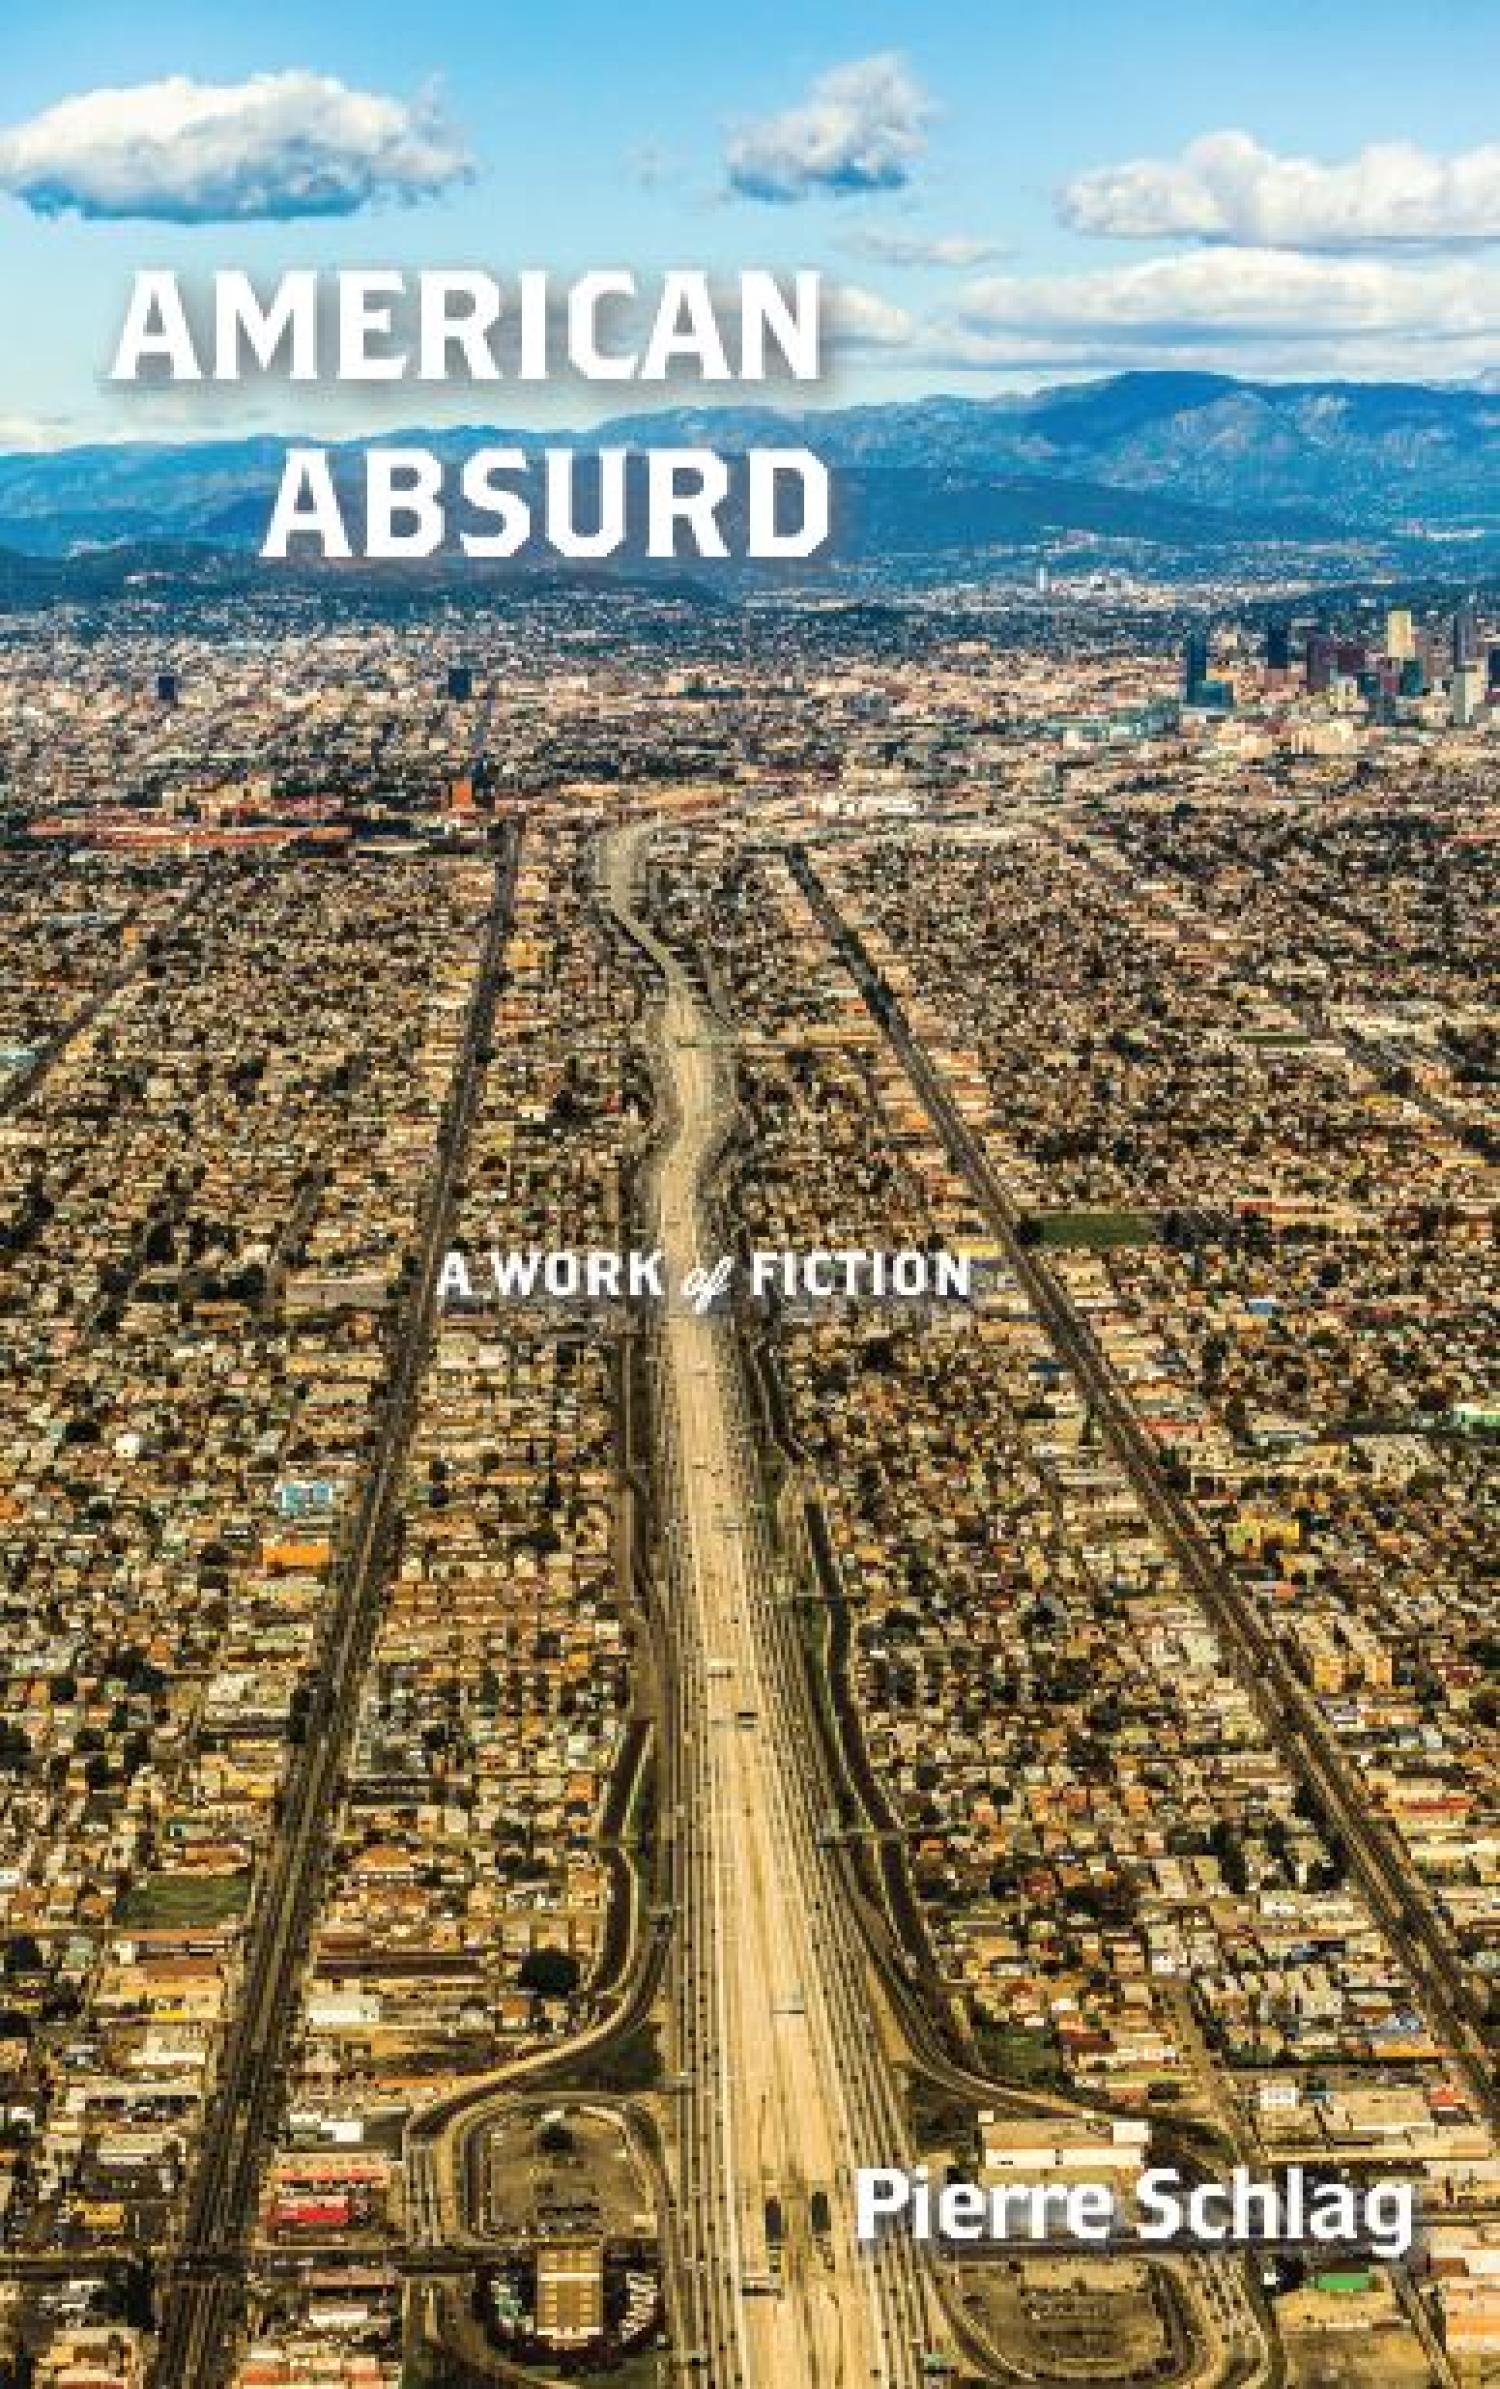 American Absurd: A Work of Fiction